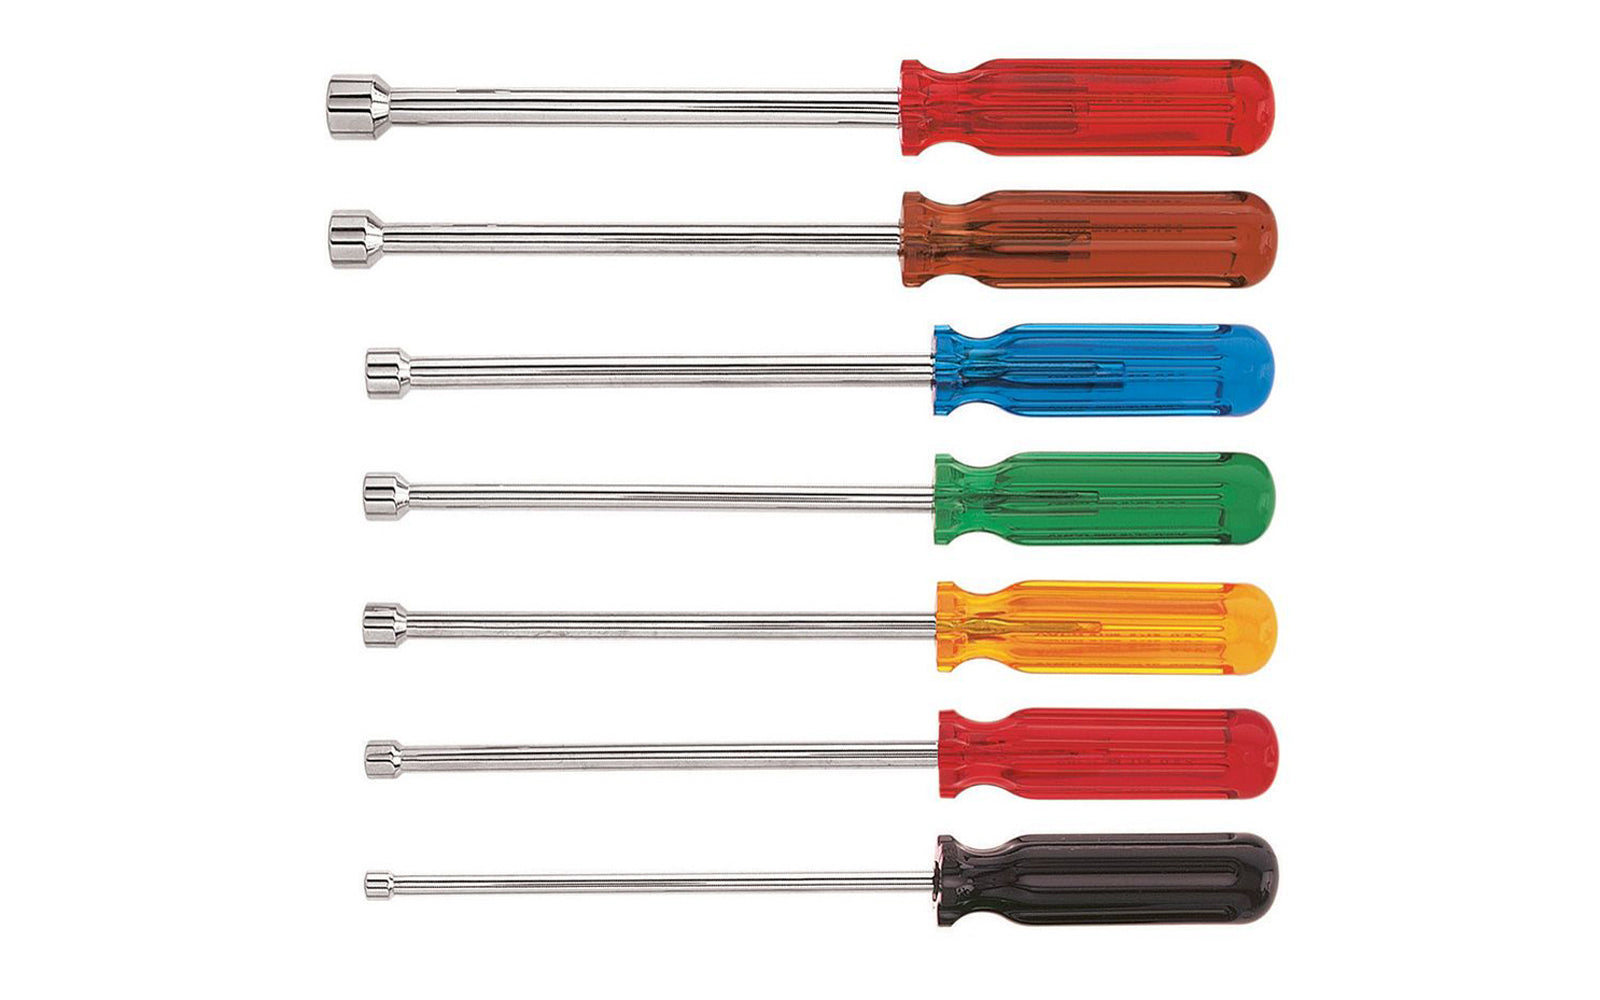 Klein Tools Vaco 7-Piece Nut-Driver Set. Model No. 89904. Includes sizes 3/16", 1/4", 5/16", 11/32", 3/8", 7/16", & 1/2" sizes. Contains seven 6" shaft nut drivers that reach into deep recesses. Seven Piece Nut Driver Set. 092644327117. Made in USA.